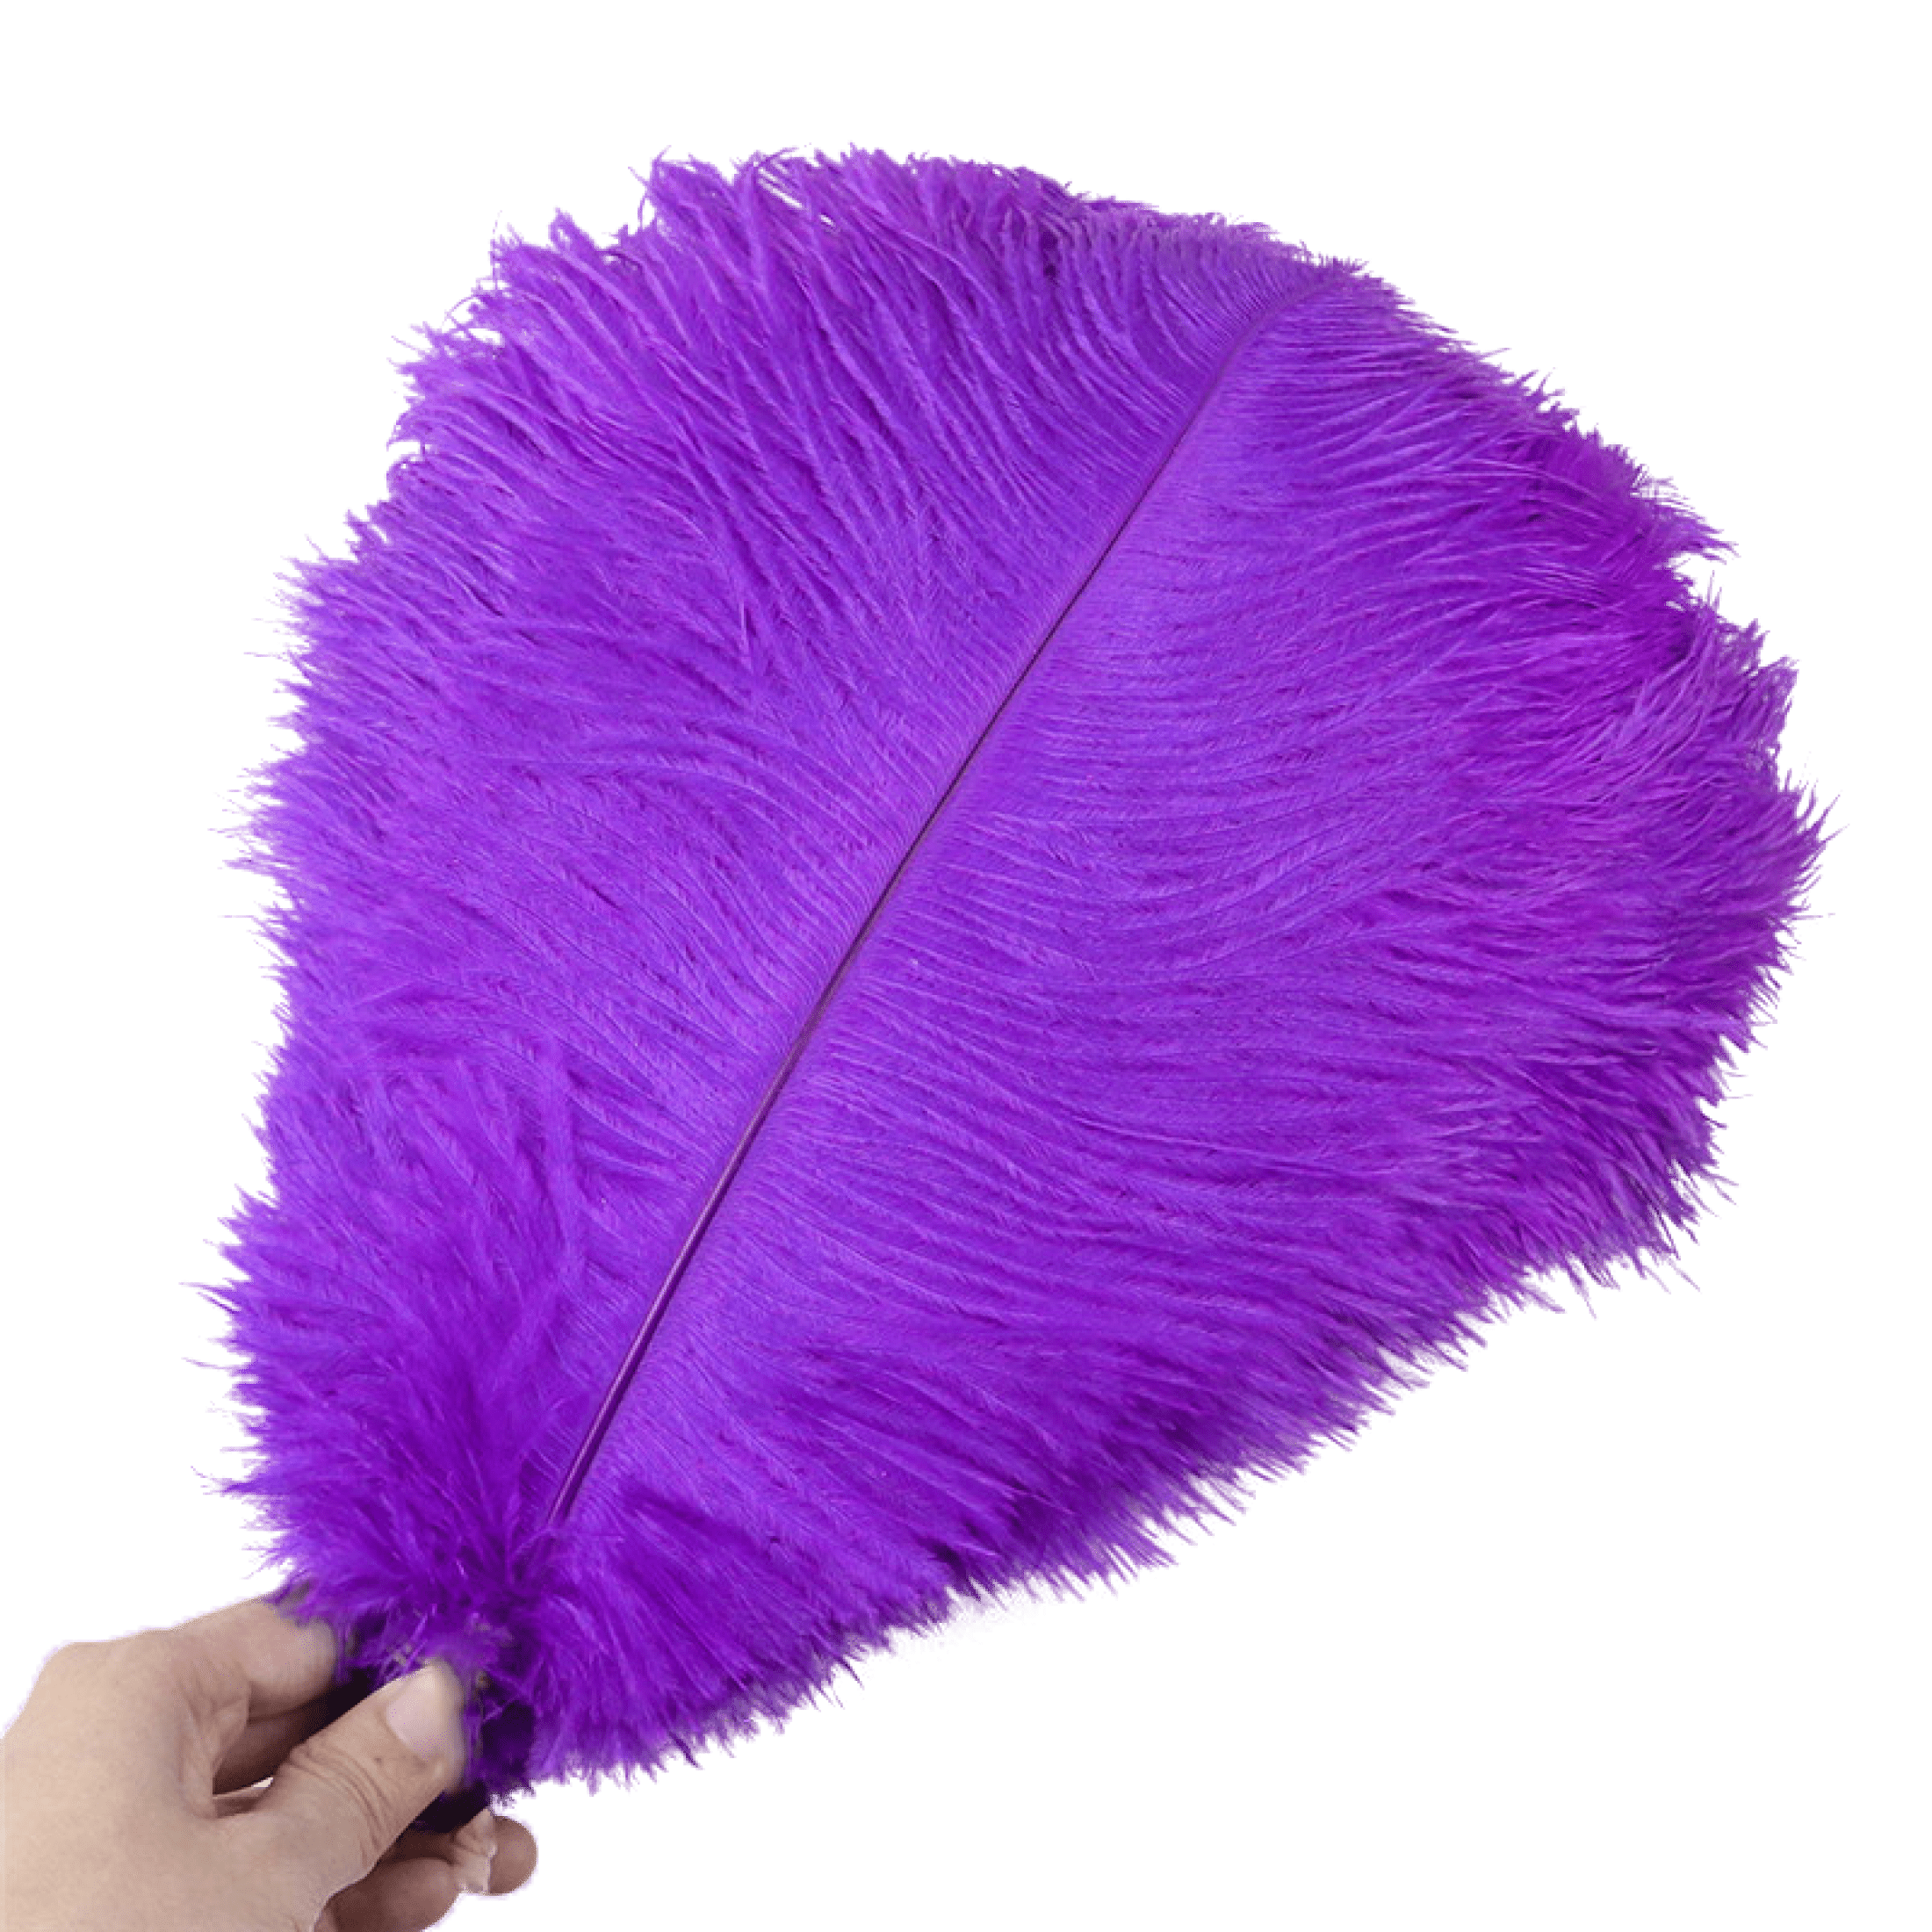 EUBUY 10Pcs Colorful Natural Ostrich Feathers Party Carnaval Wedding ...